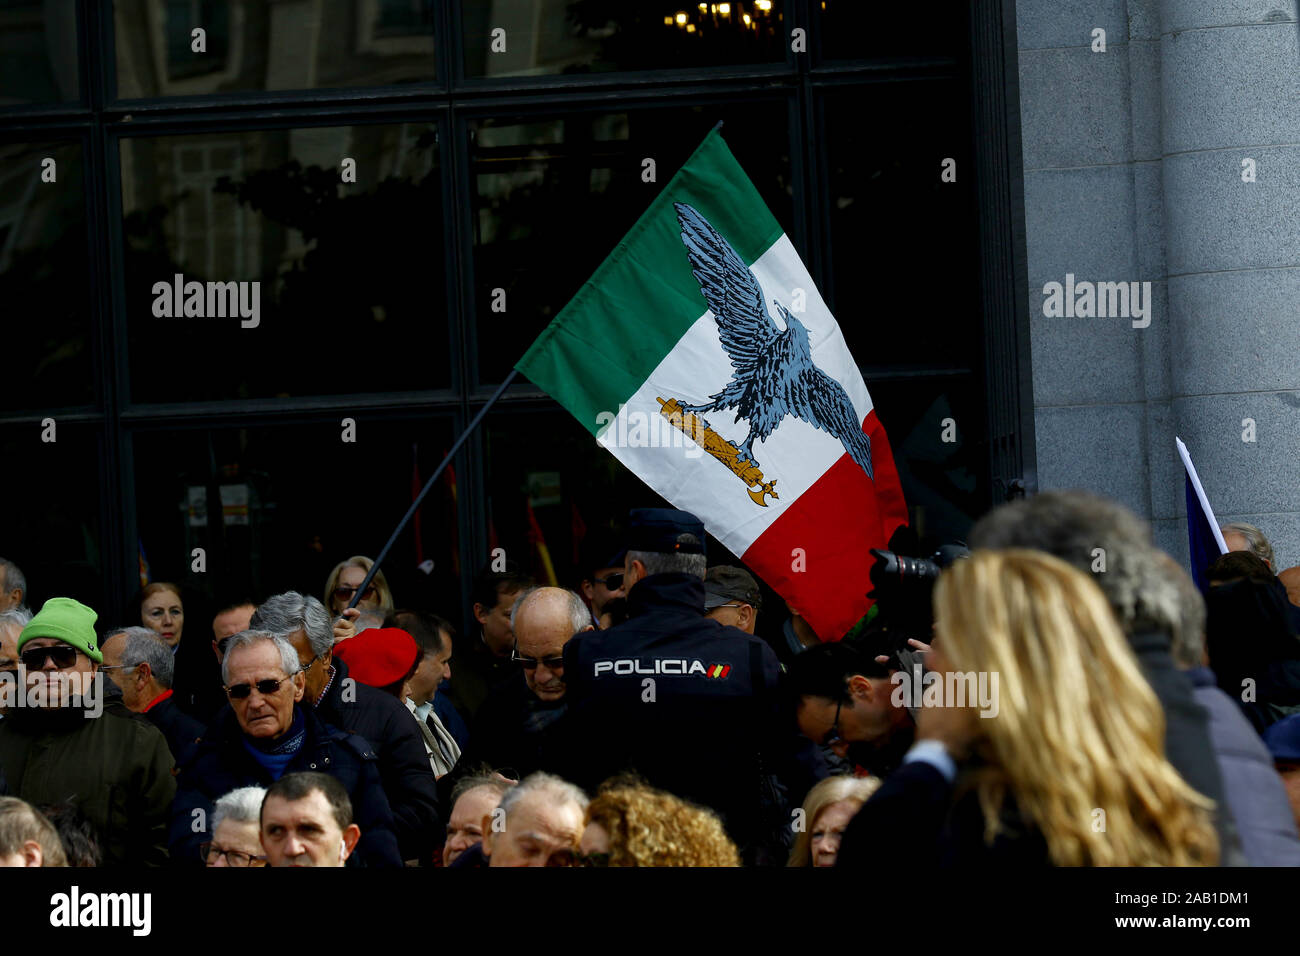 Madrid, Spain; 24/11/2019.- Far-right groups La Falange and Alternativa Española (AES) in Madrid march to commemorate the dictatorship of Francisco Franco and the 38th anniversary of the dictator's death. Also the 77th anniversary of the death of the dictator and leader of La Falange, José Antonio Primo de Rivera and to protest against the exhumation of the dictator. At the event six women members of Femen protestedPhoto: Juan Carlos Rojas/Picture Alliance | usage worldwide Stock Photo